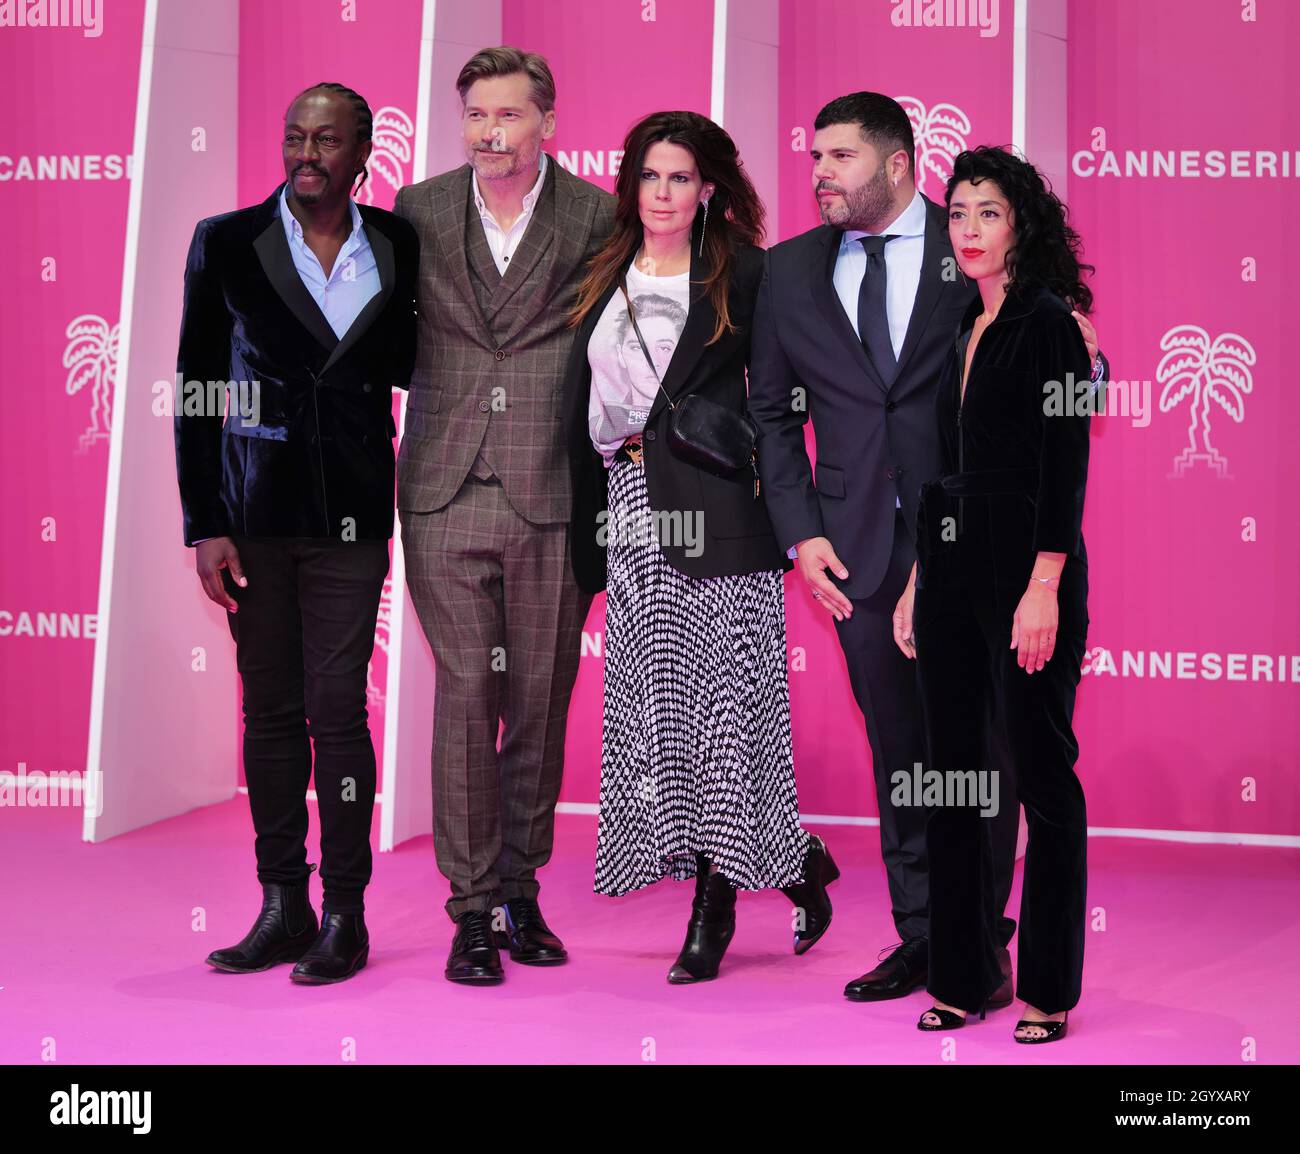 Cannes, France, 9 October 2021, JURY LONG FORM; MARCO PRINCE; NICOLAJ COSTER-WALDAU; SIGAL AVIN; SALVATORE ESPOSITO and NAIDRA AYADI are posing along the pink carpet during the Canneseries - International Series Festival at the Palais des Festivals in Cannes © ifnm press / Alamy Live News Stock Photo